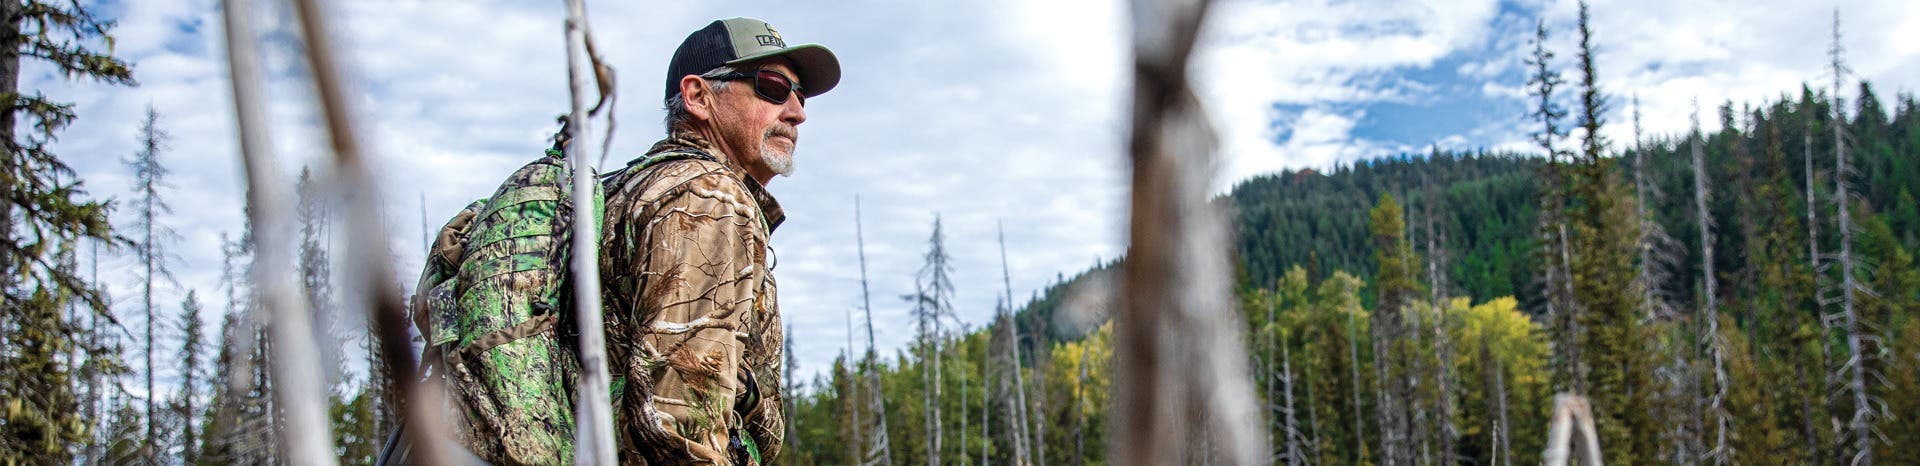 Image of man wearing hunting sunglasses on face while wearing camo in the woods.